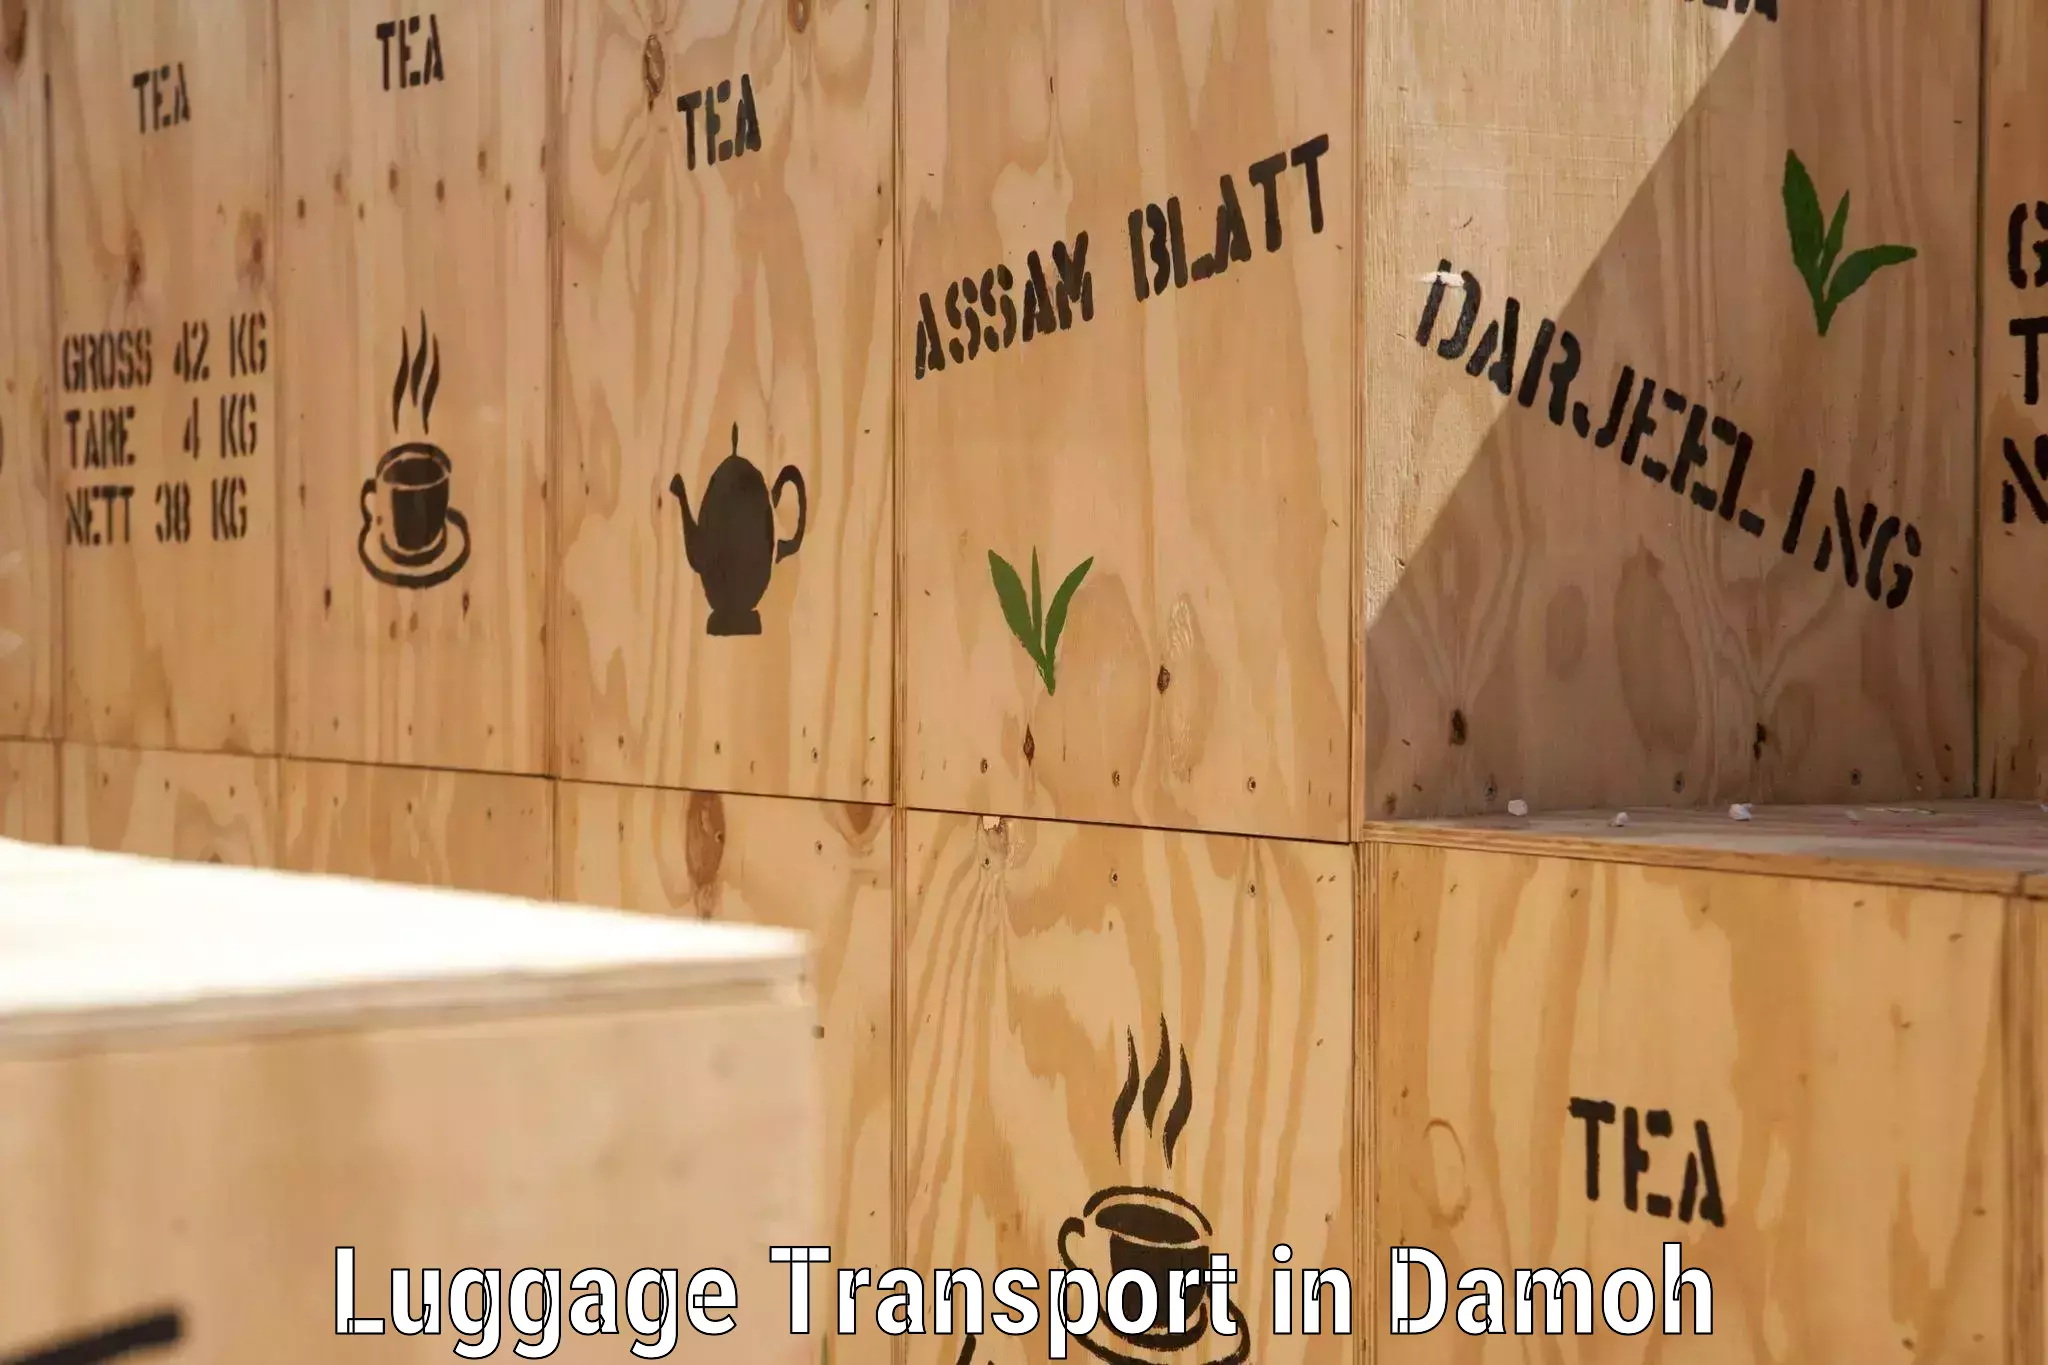 Professional baggage transport in Damoh